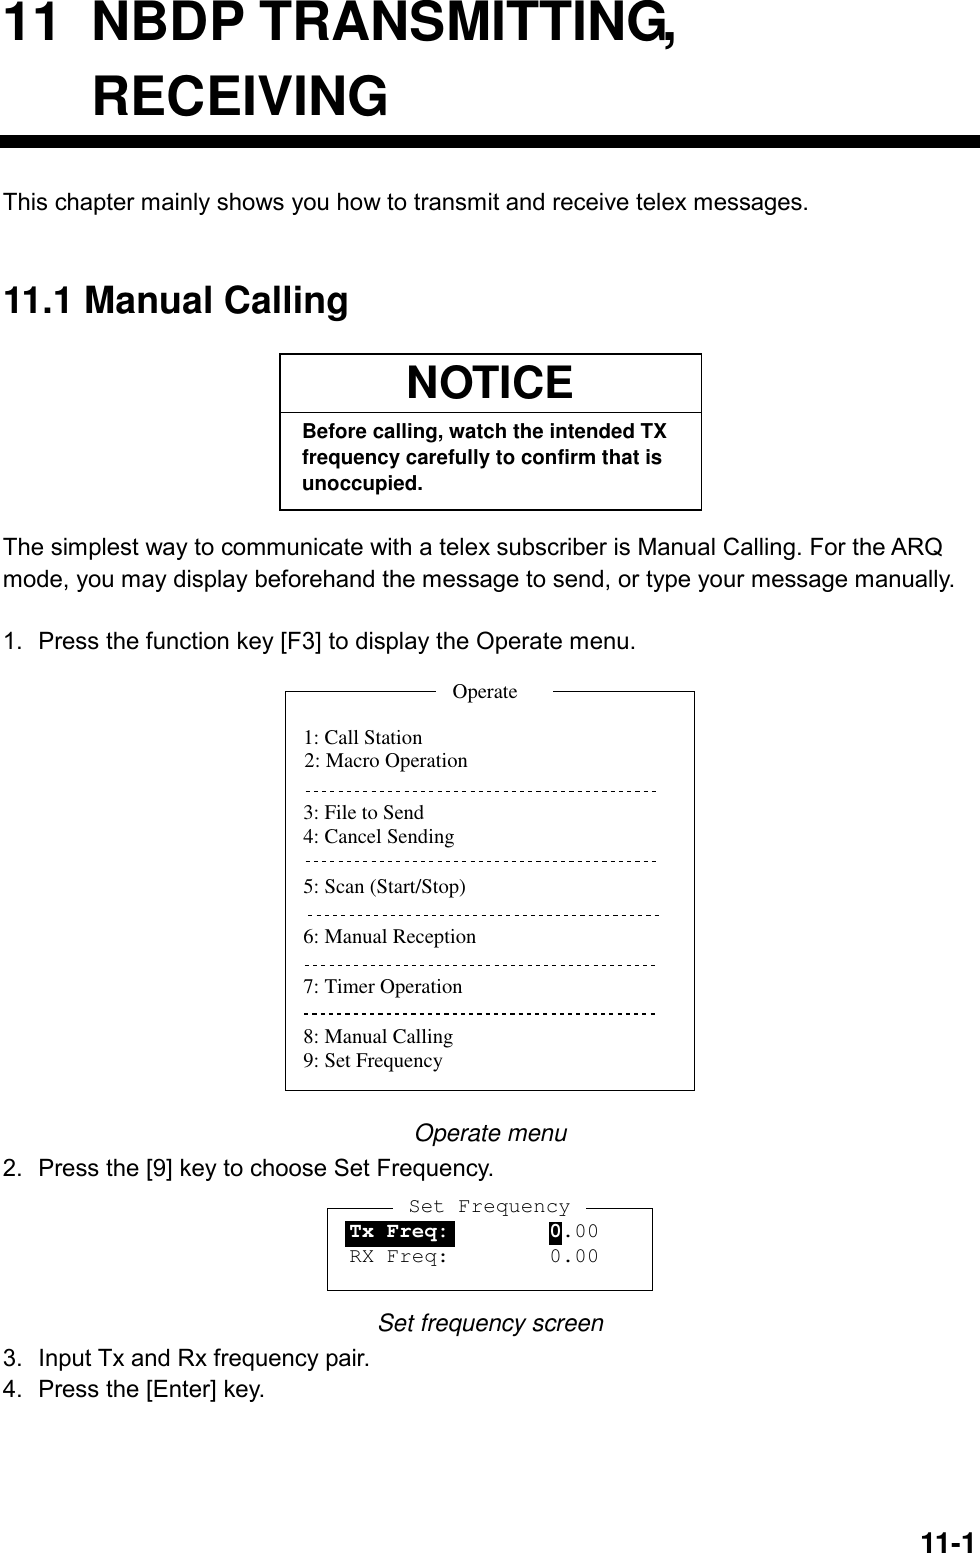  11-1  11 NBDP TRANSMITTING, RECEIVING This chapter mainly shows you how to transmit and receive telex messages.     11.1 Manual Calling NOTICEBefore calling, watch the intended TXfrequency carefully to confirm that isunoccupied. The simplest way to communicate with a telex subscriber is Manual Calling. For the ARQ mode, you may display beforehand the message to send, or type your message manually.  1.  Press the function key [F3] to display the Operate menu. 1: Call Station3: File to Send4: Cancel Sending5: Scan (Start/Stop)6: Manual Reception7: Timer Operation8: Manual Calling9: Set FrequencyOperate2: Macro Operation Operate menu 2.  Press the [9] key to choose Set Frequency. Set FrequencyTx Freq:        0.00RX Freq:        0.00 Set frequency screen 3.  Input Tx and Rx frequency pair.   4.  Press the [Enter] key. 